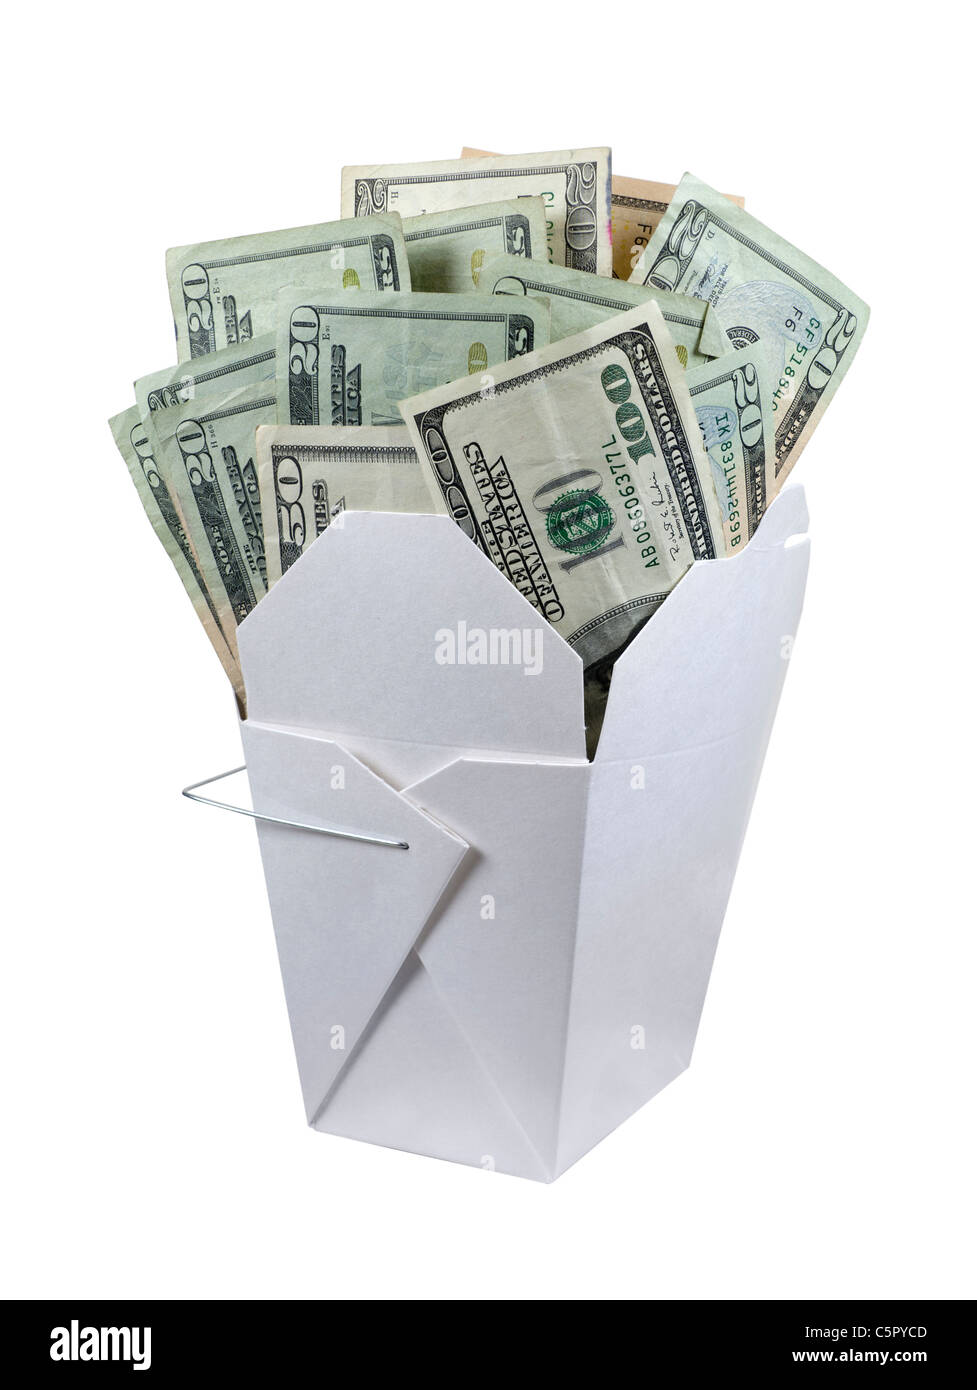 A wax paper box that is folded up to hold take out food items but filled with money - path included..................... Stock Photo